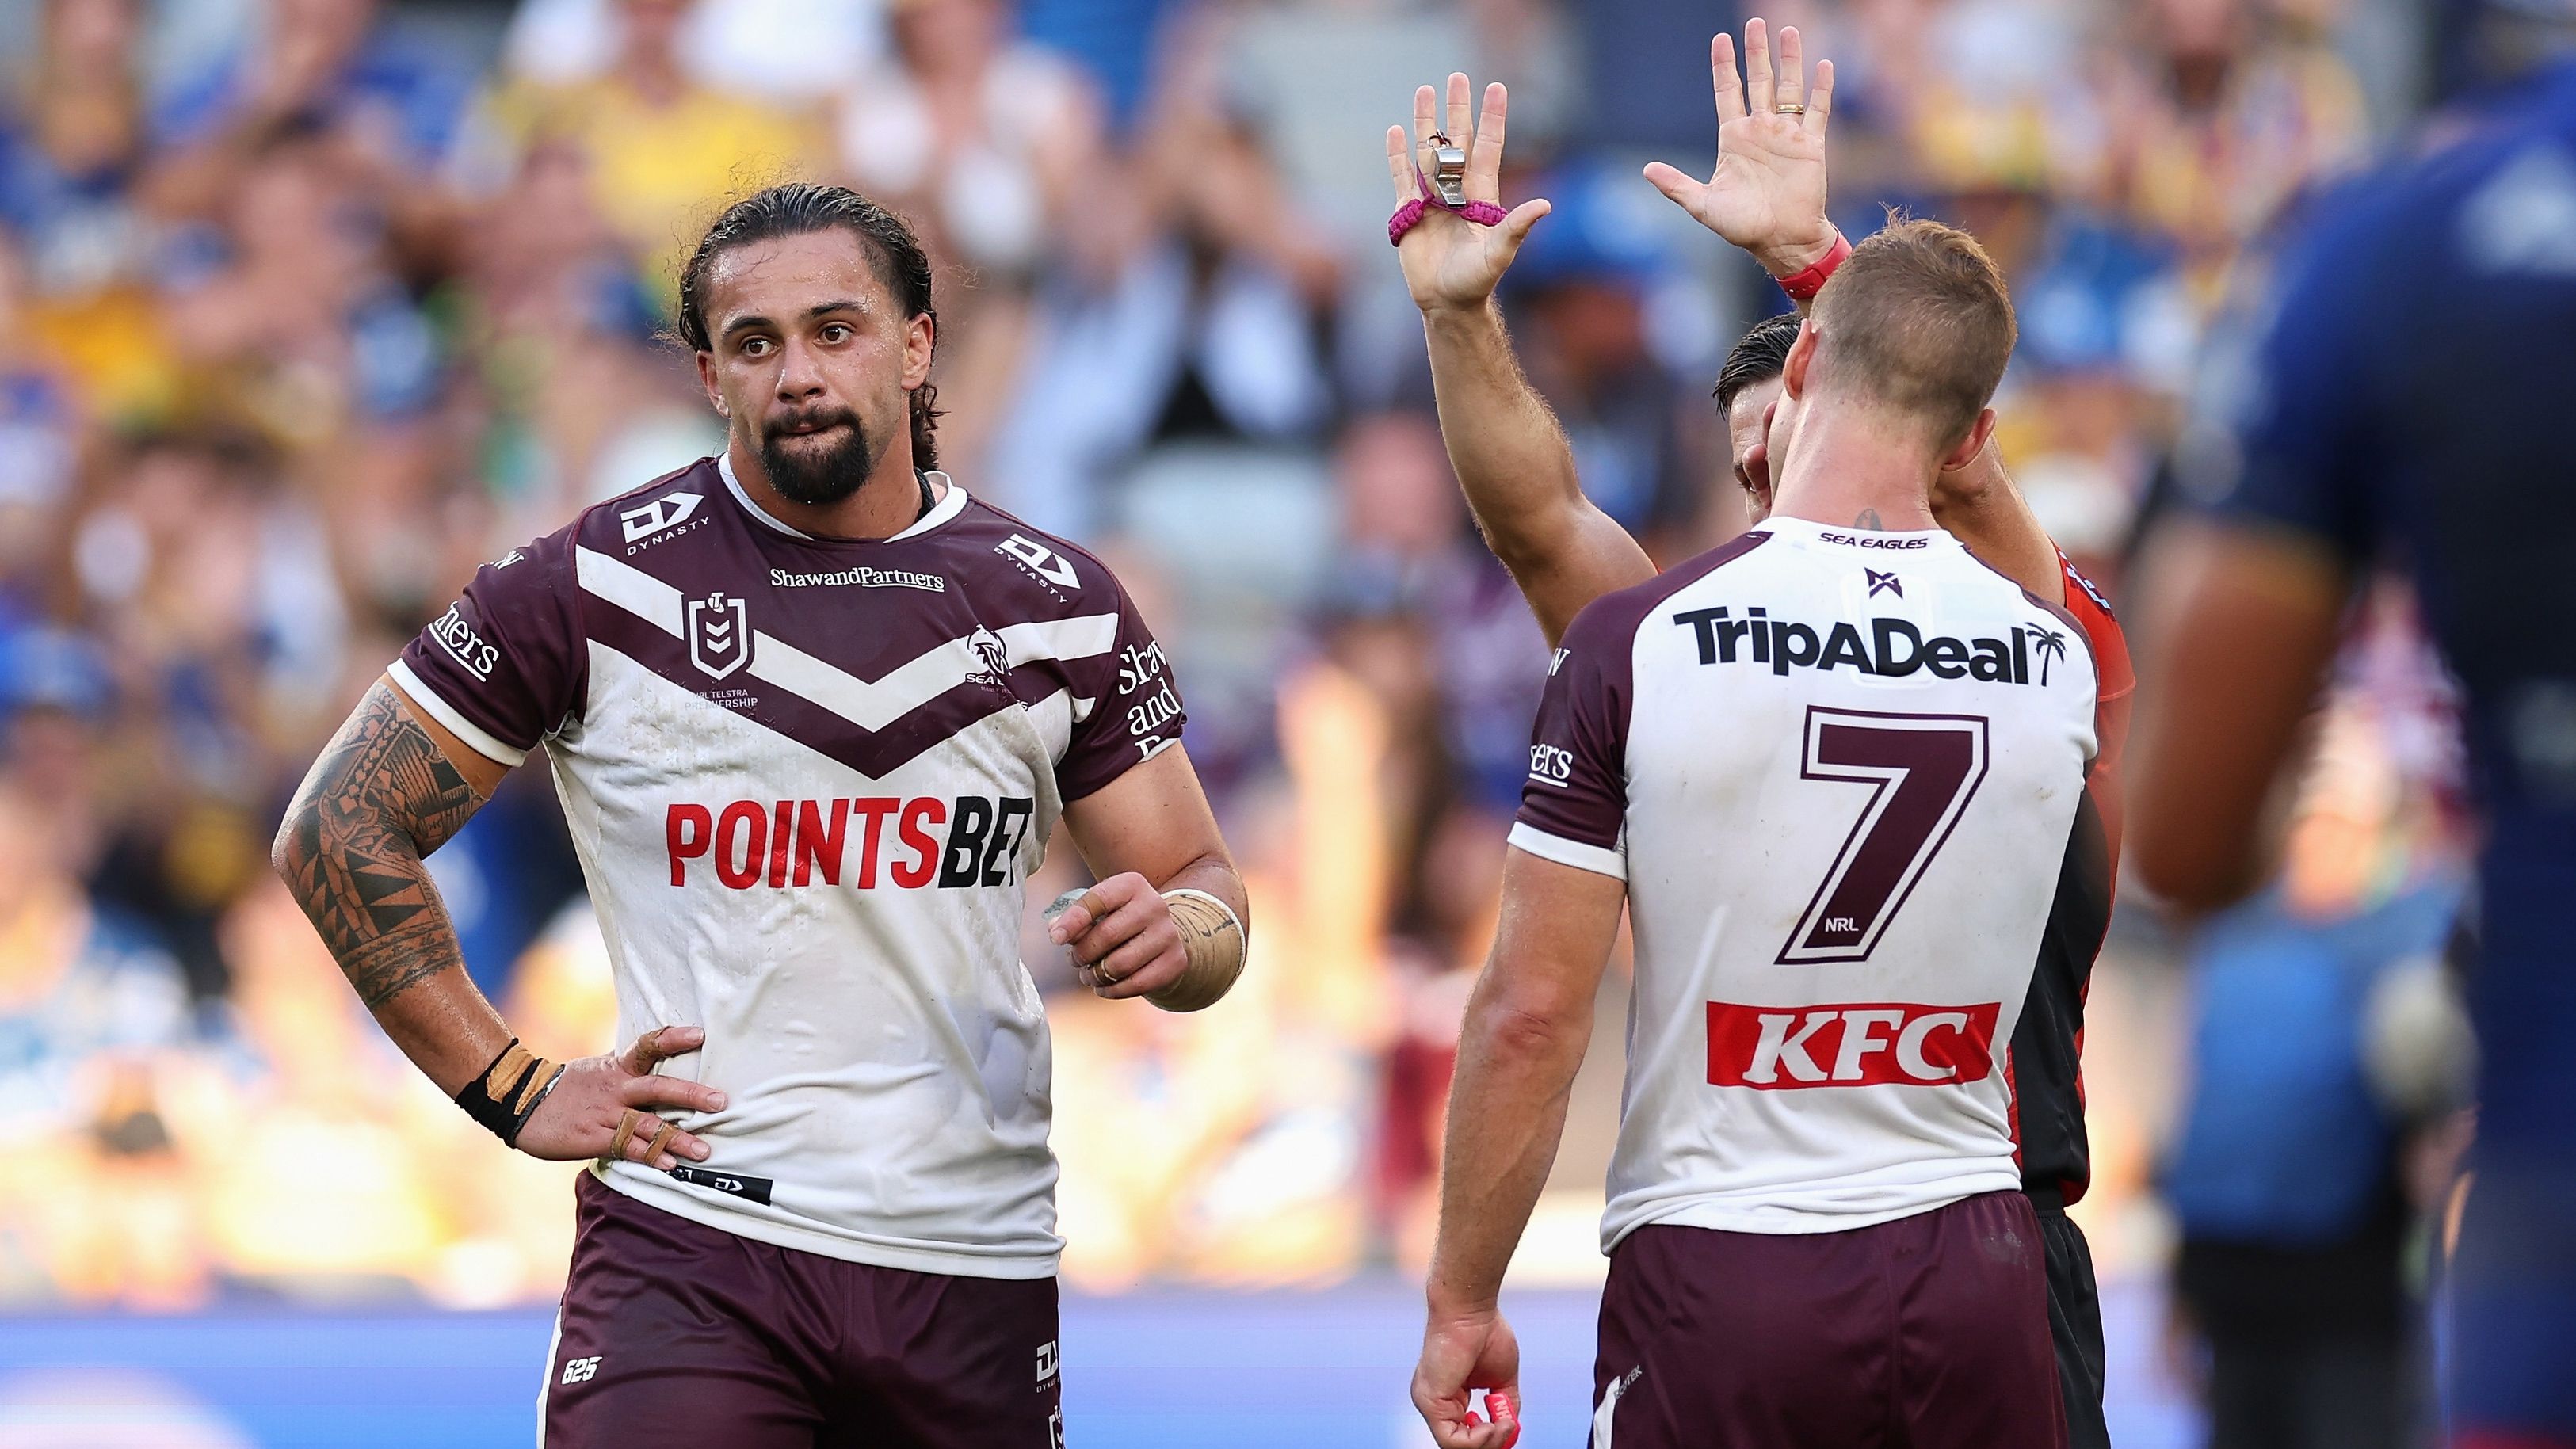 'He launches in': Josh Aloiai in hot water after late melee in Manly's loss to Parramatta